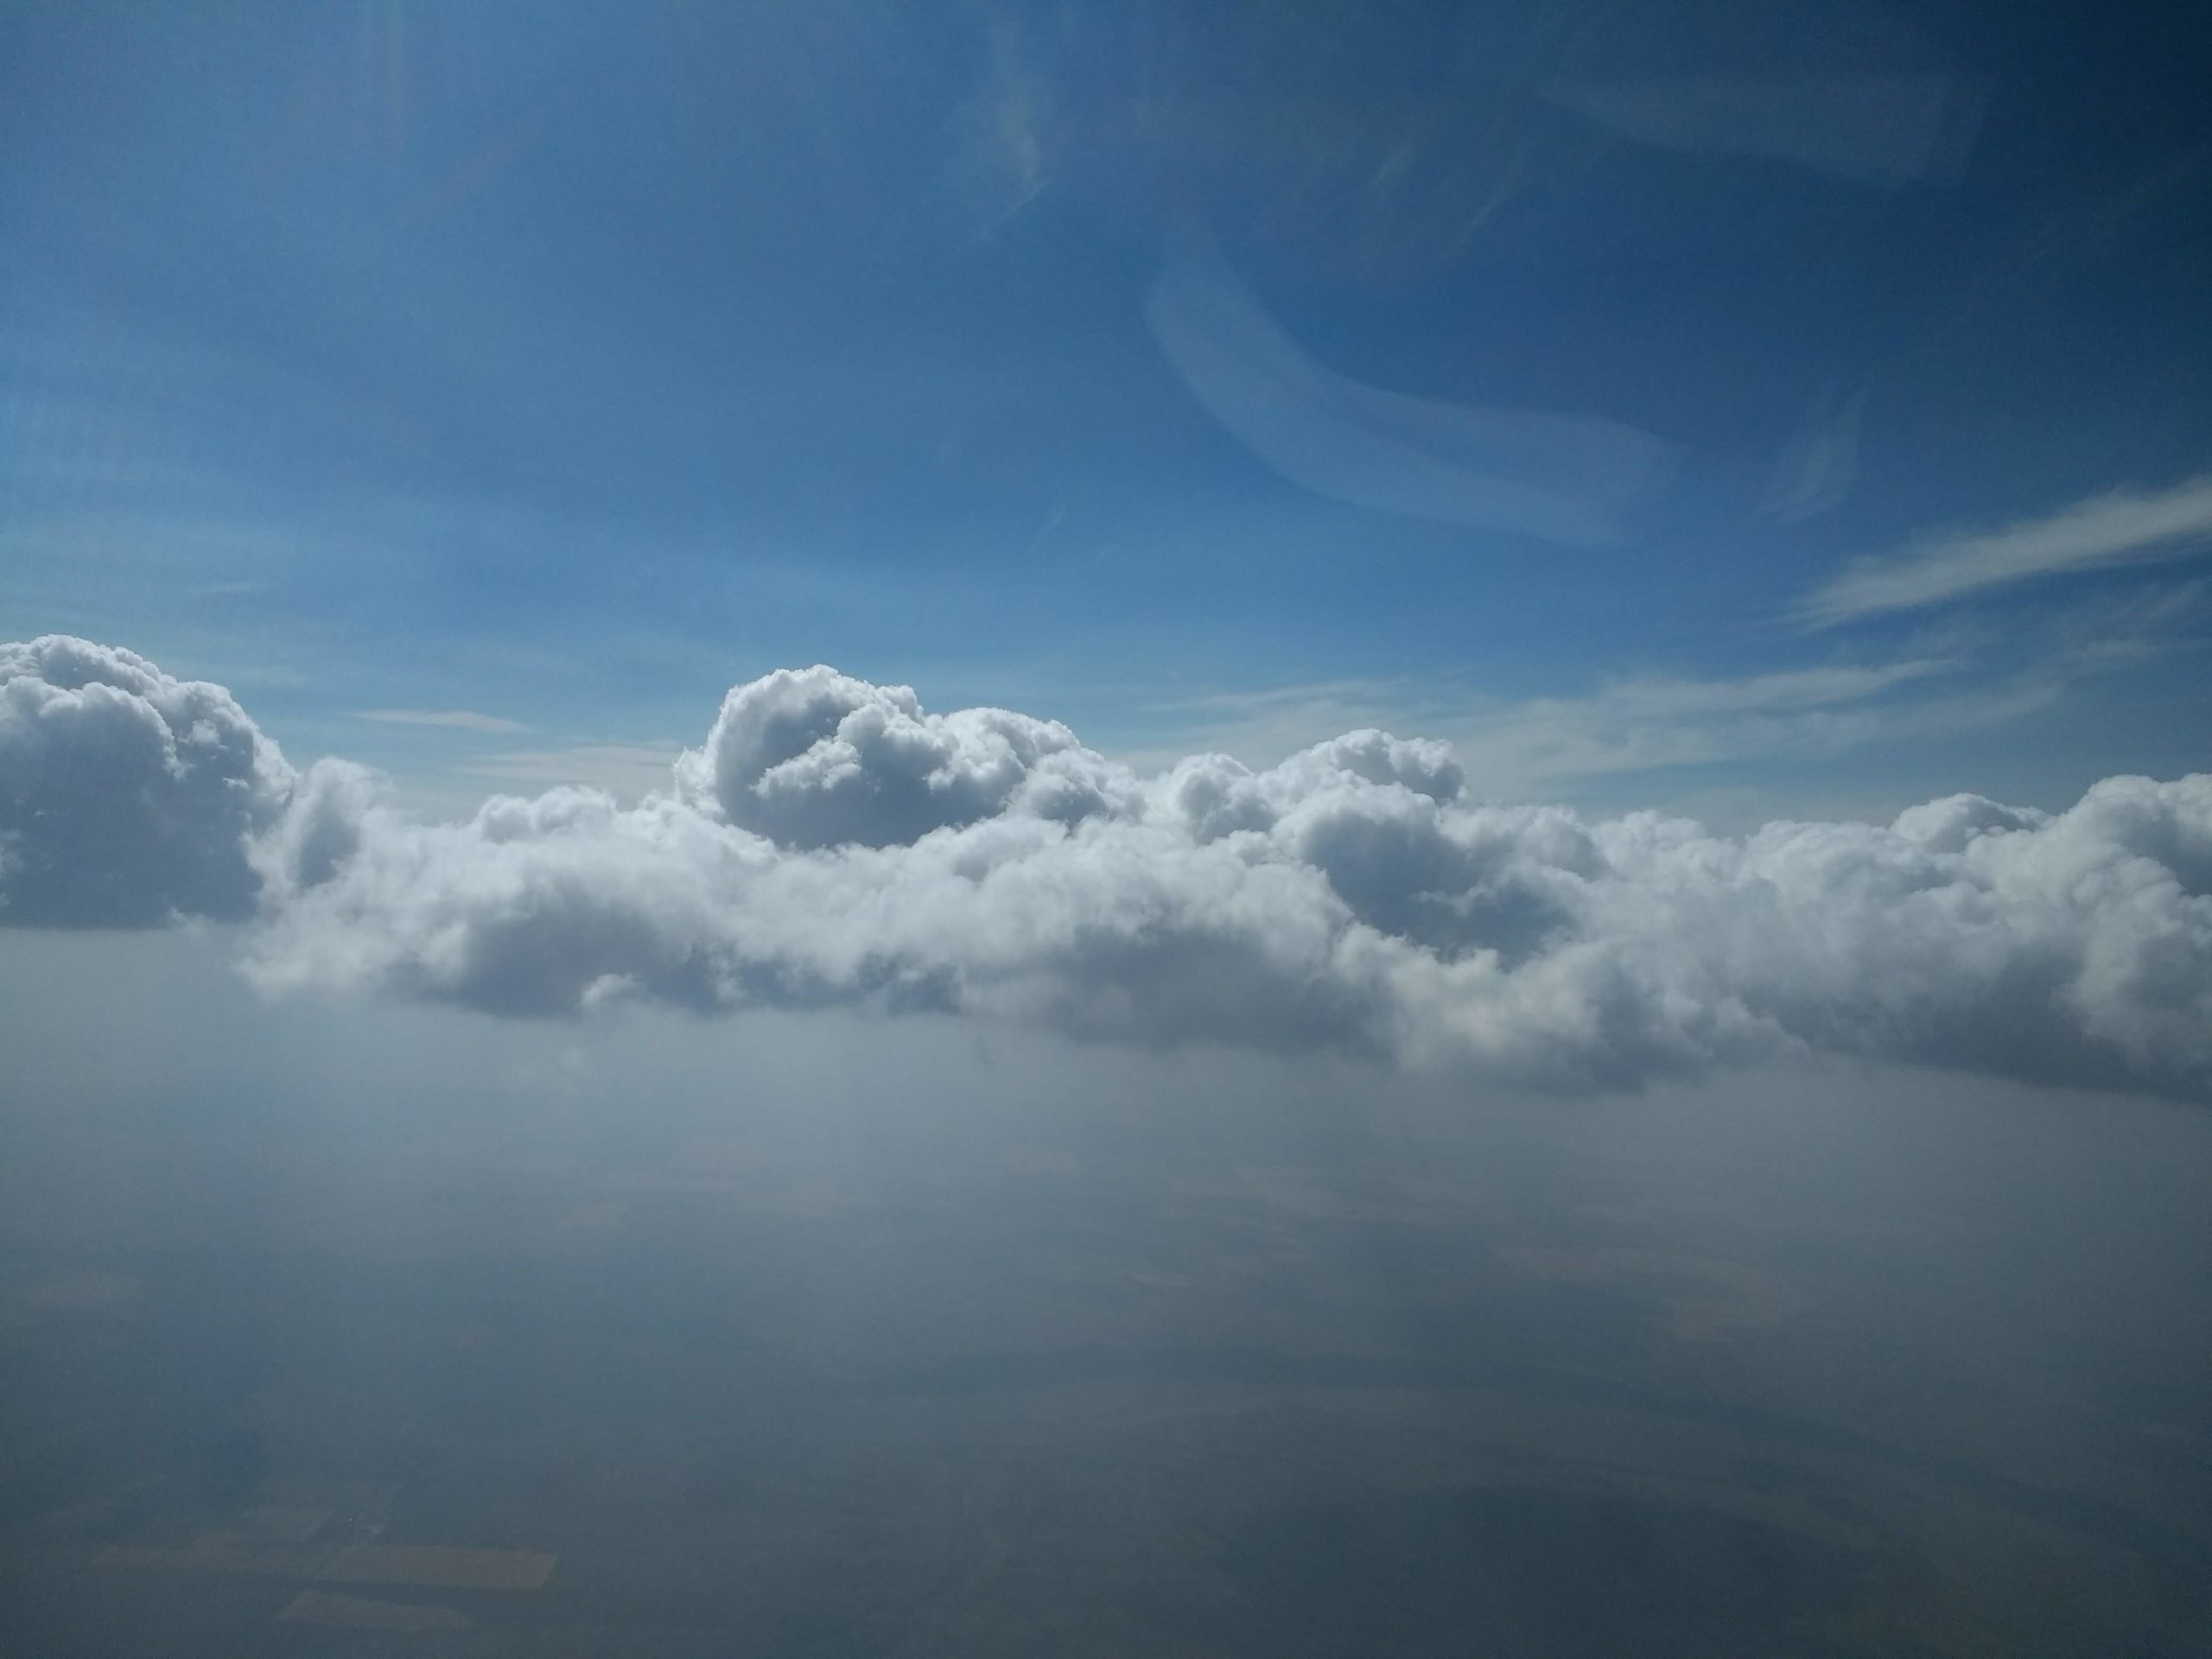 A layer of gray smoke hangs over green and brown mountains, with trees and fields below. White clouds intermingle with the smoke, and the sky is blue but hazy above the clouds. A bit of plane is visible in the image’s center left.